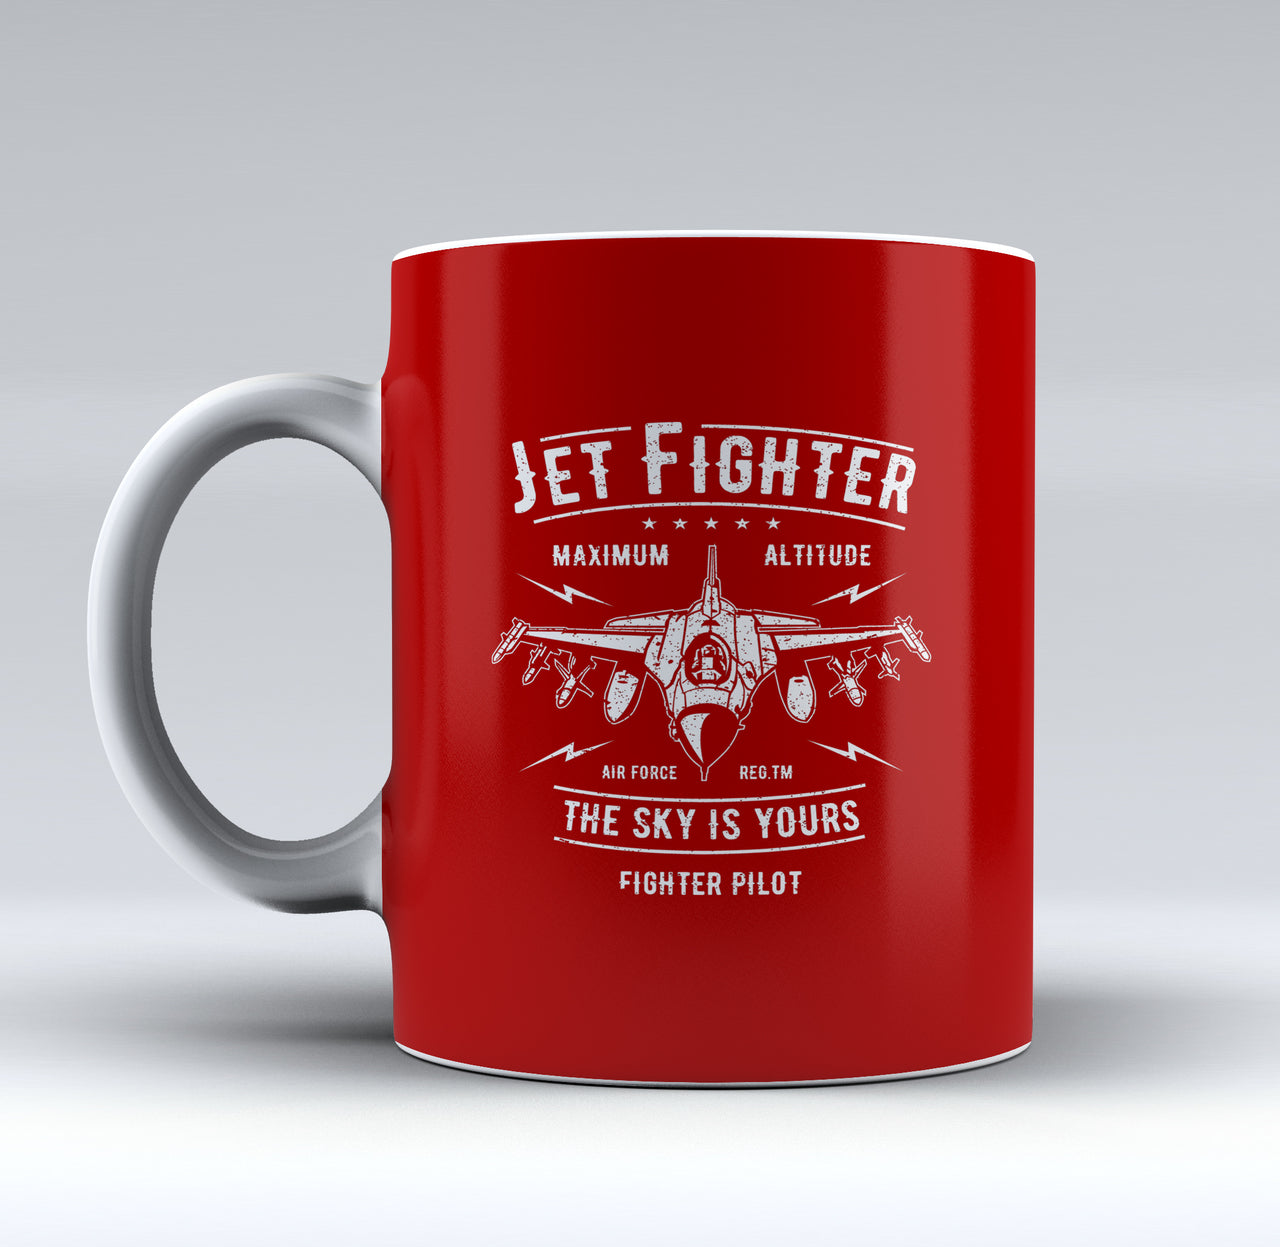 Jet Fighter - The Sky is Yours Designed Mugs